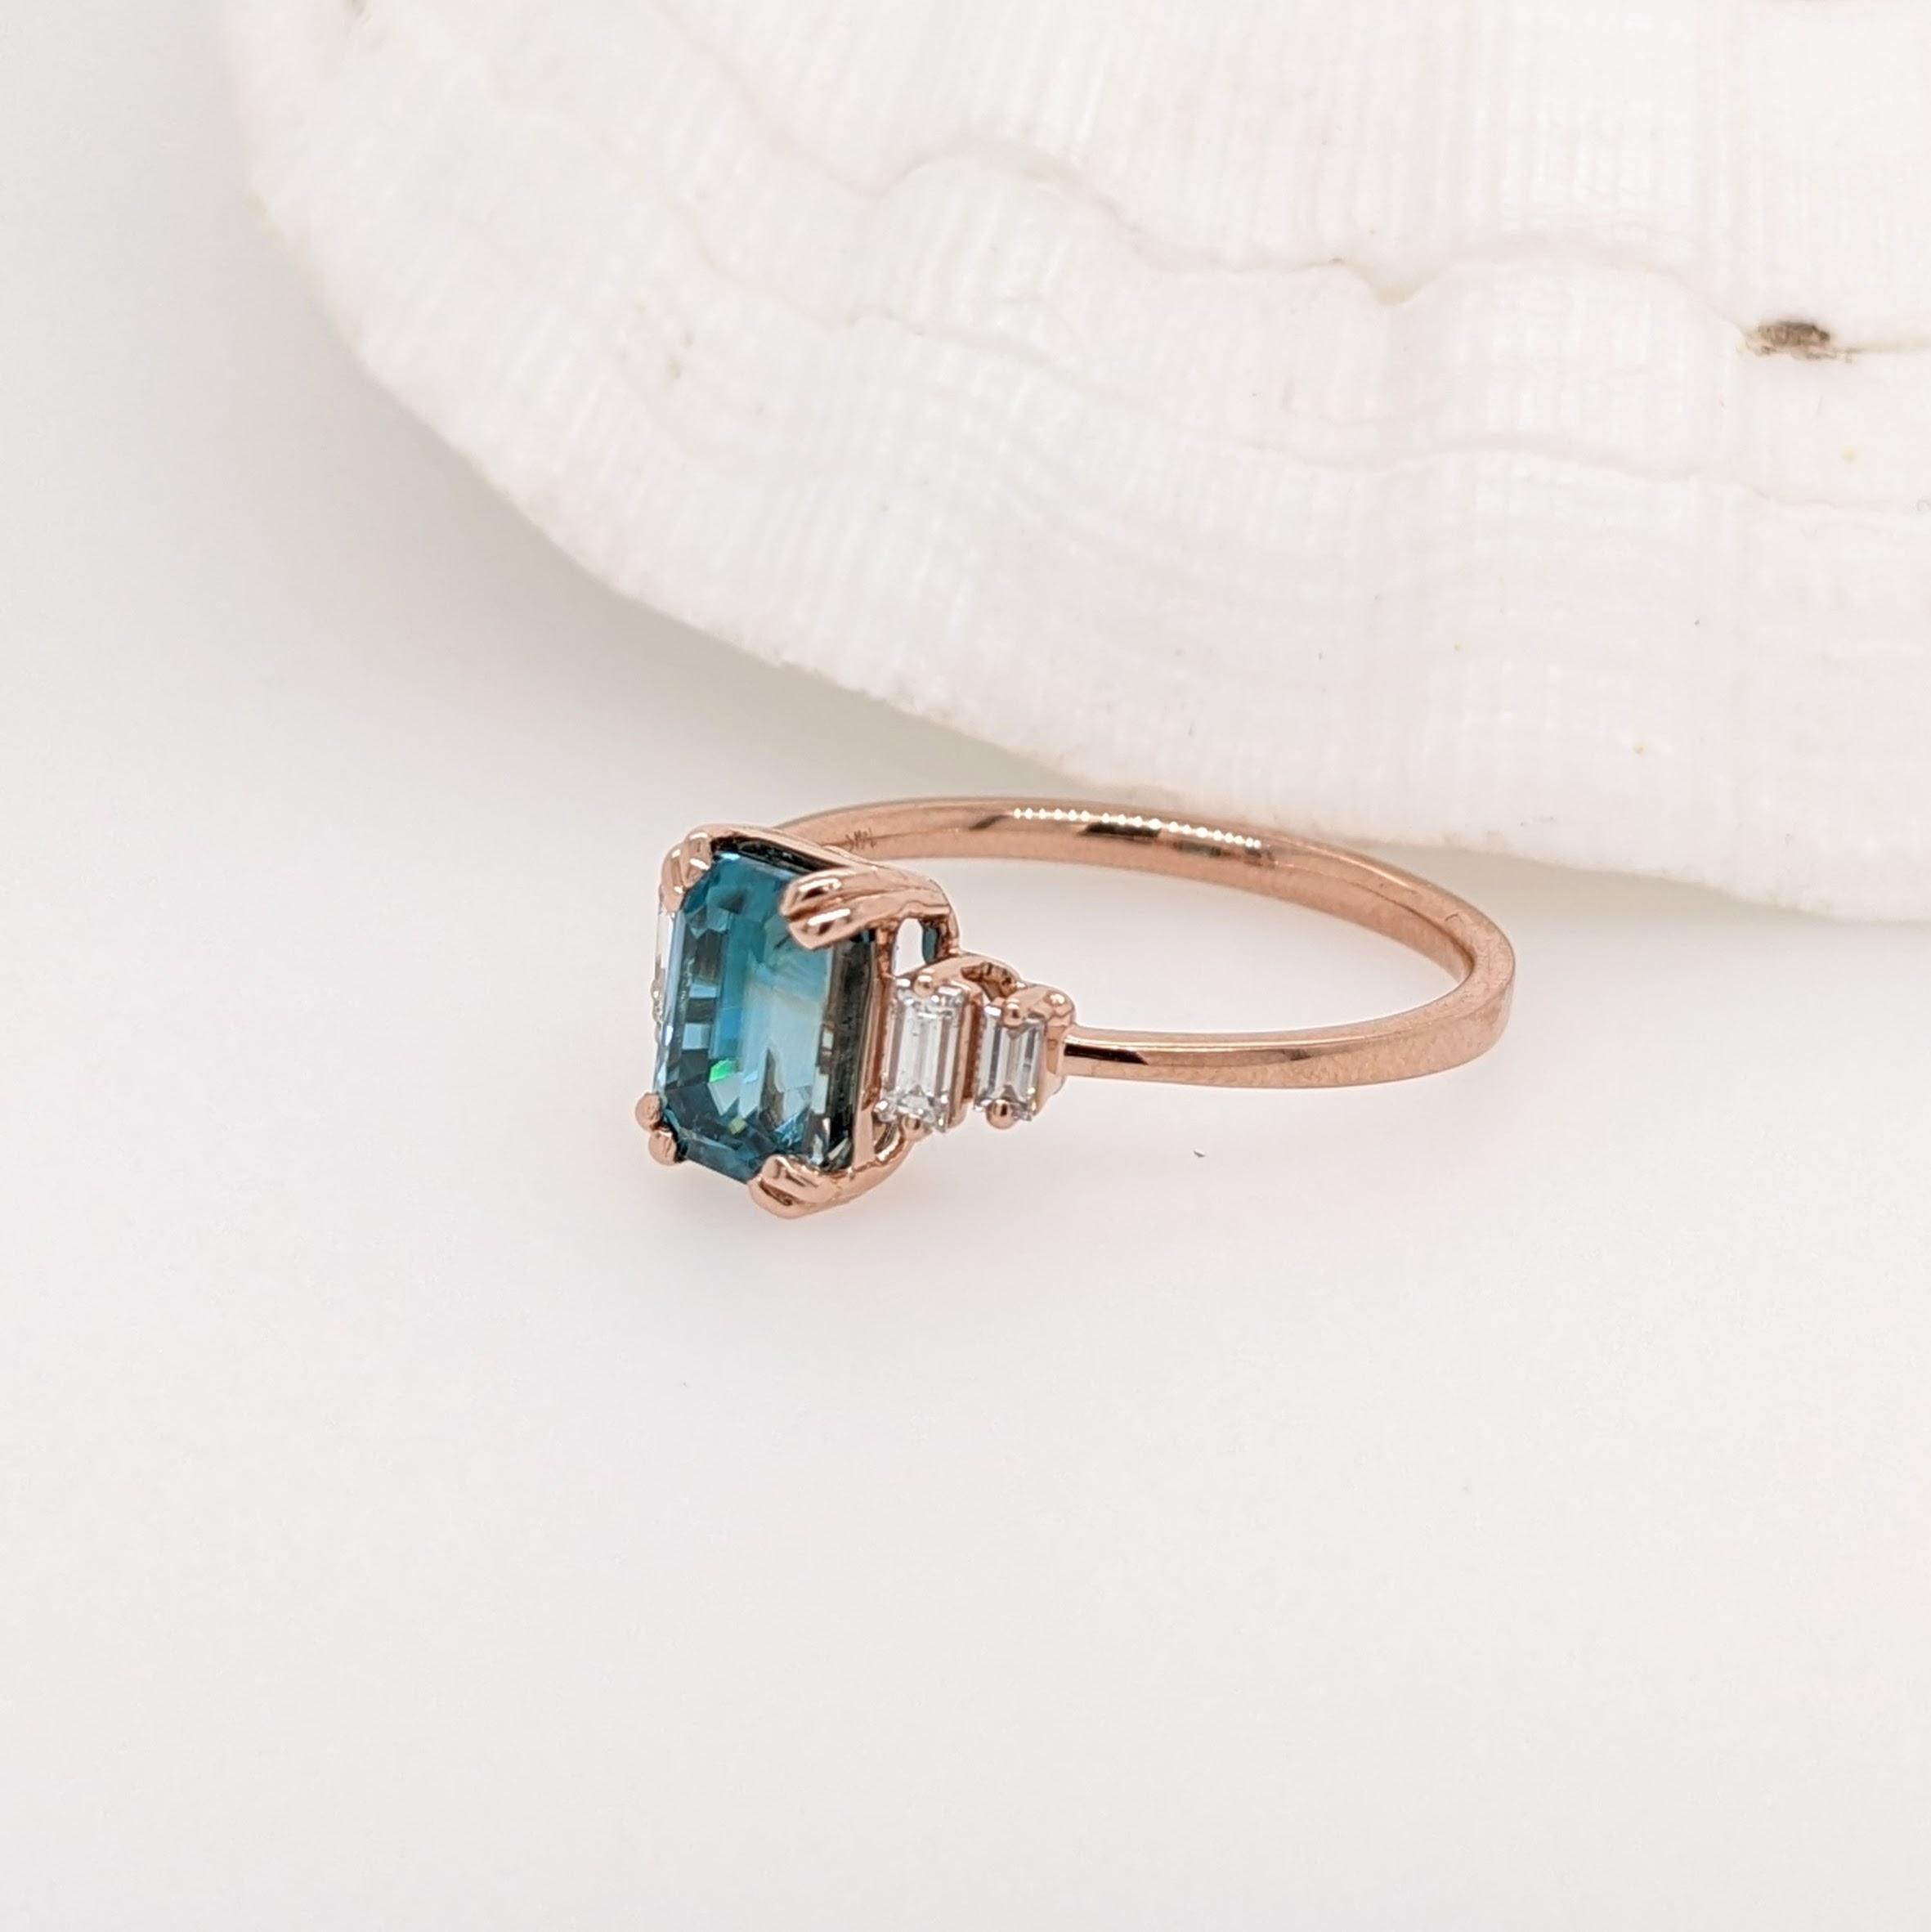 Modernist 3.66ct Zircon Ring w Diamond Accents in 14K Rose Gold Emerald Cut 8.5x6mm For Sale